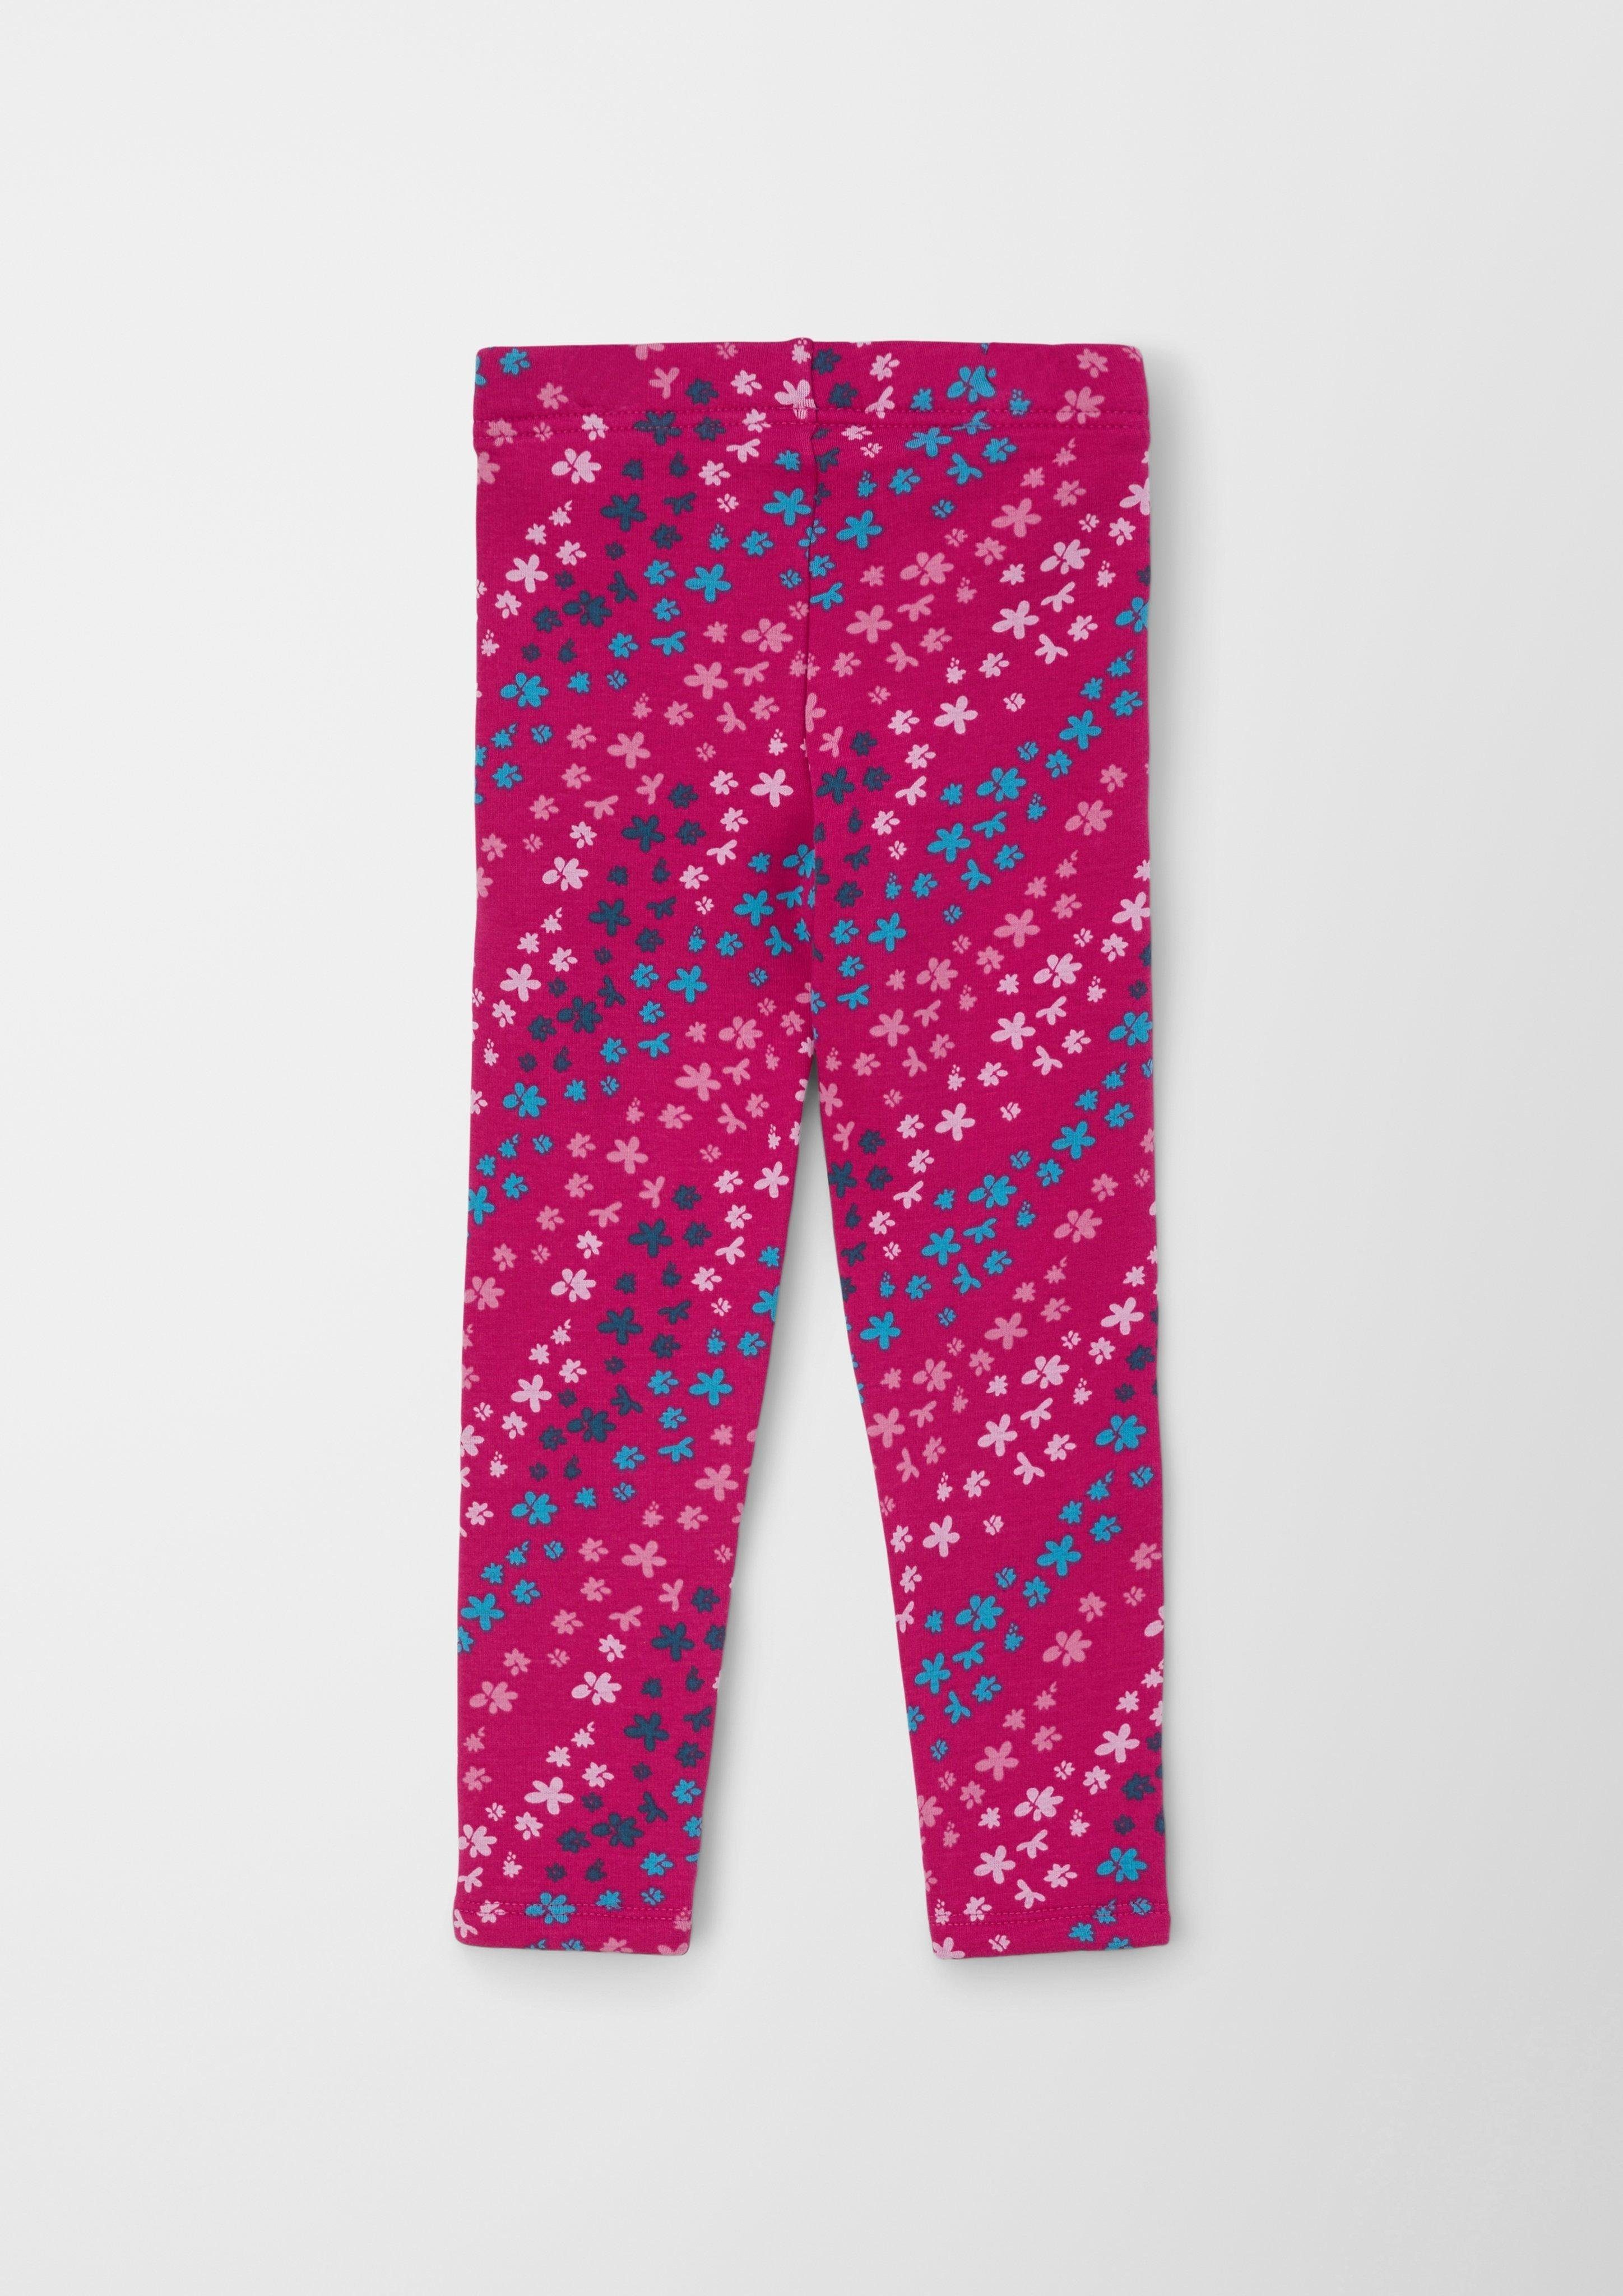 mit Leggings Thermofleece-Futter pink s.Oliver Leggings